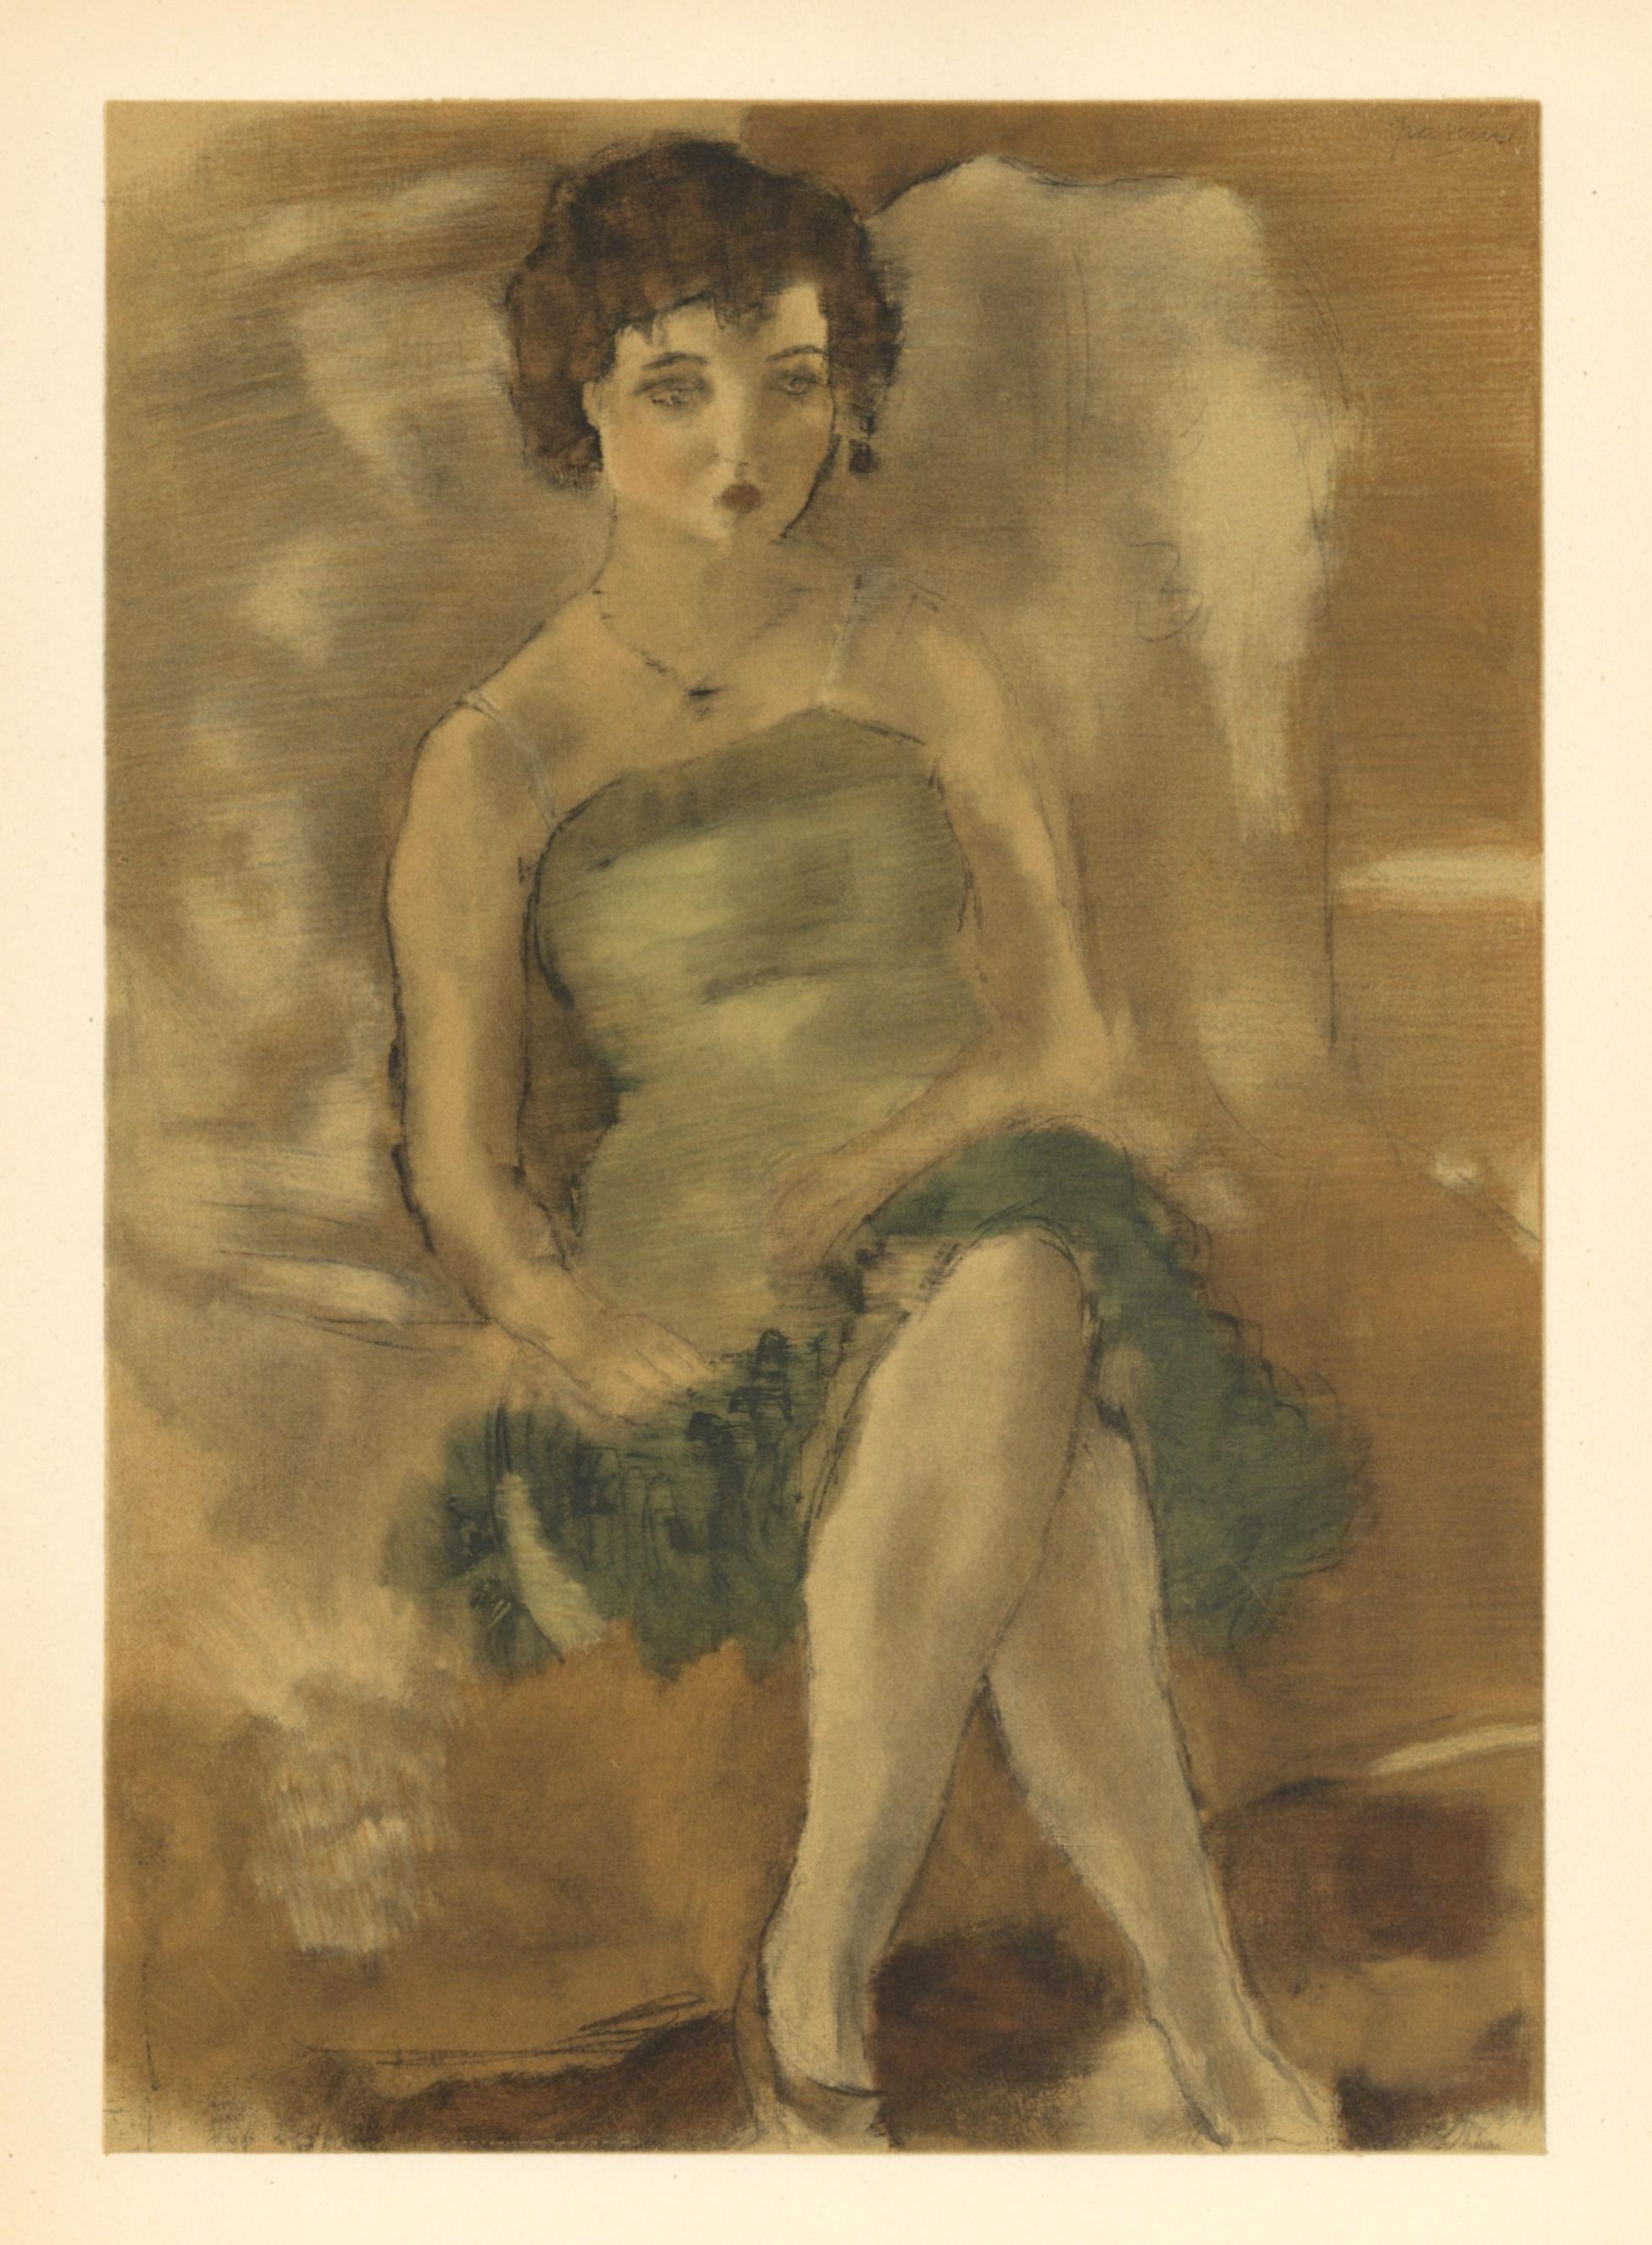 Medium: lithograph (after the painting). Printed in Paris in 1954 at the atelier of Mourlot Frères in an edition of 2000. Sheet size: 12 1/4 x 9 1/2 inches (315 x 245 mm). Signed in the plate (not hand-signed). 